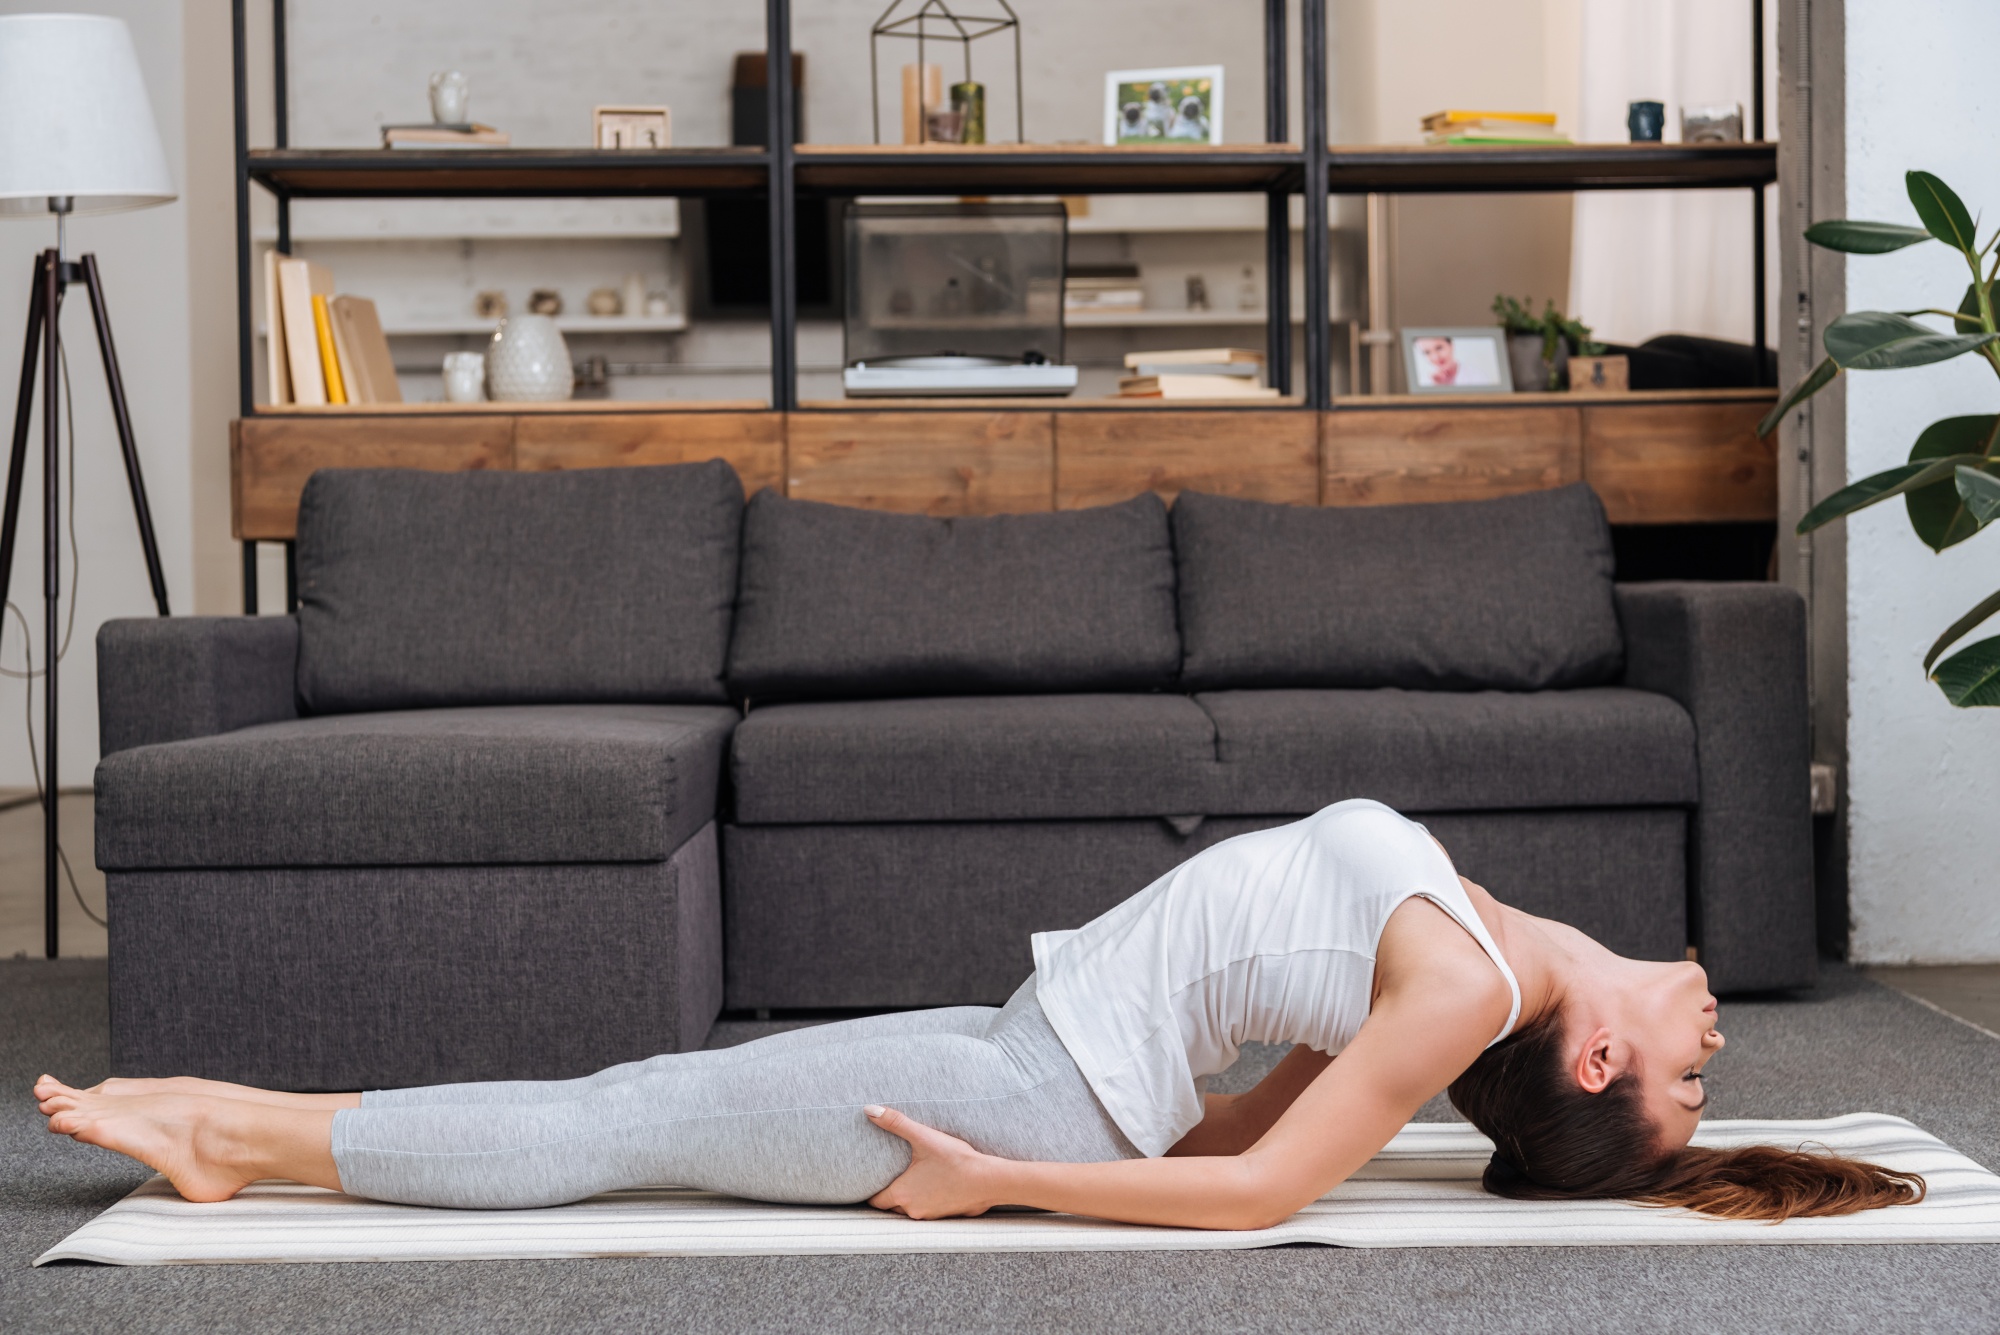 better sex after menopause, woman practicing fish pose at home in living room